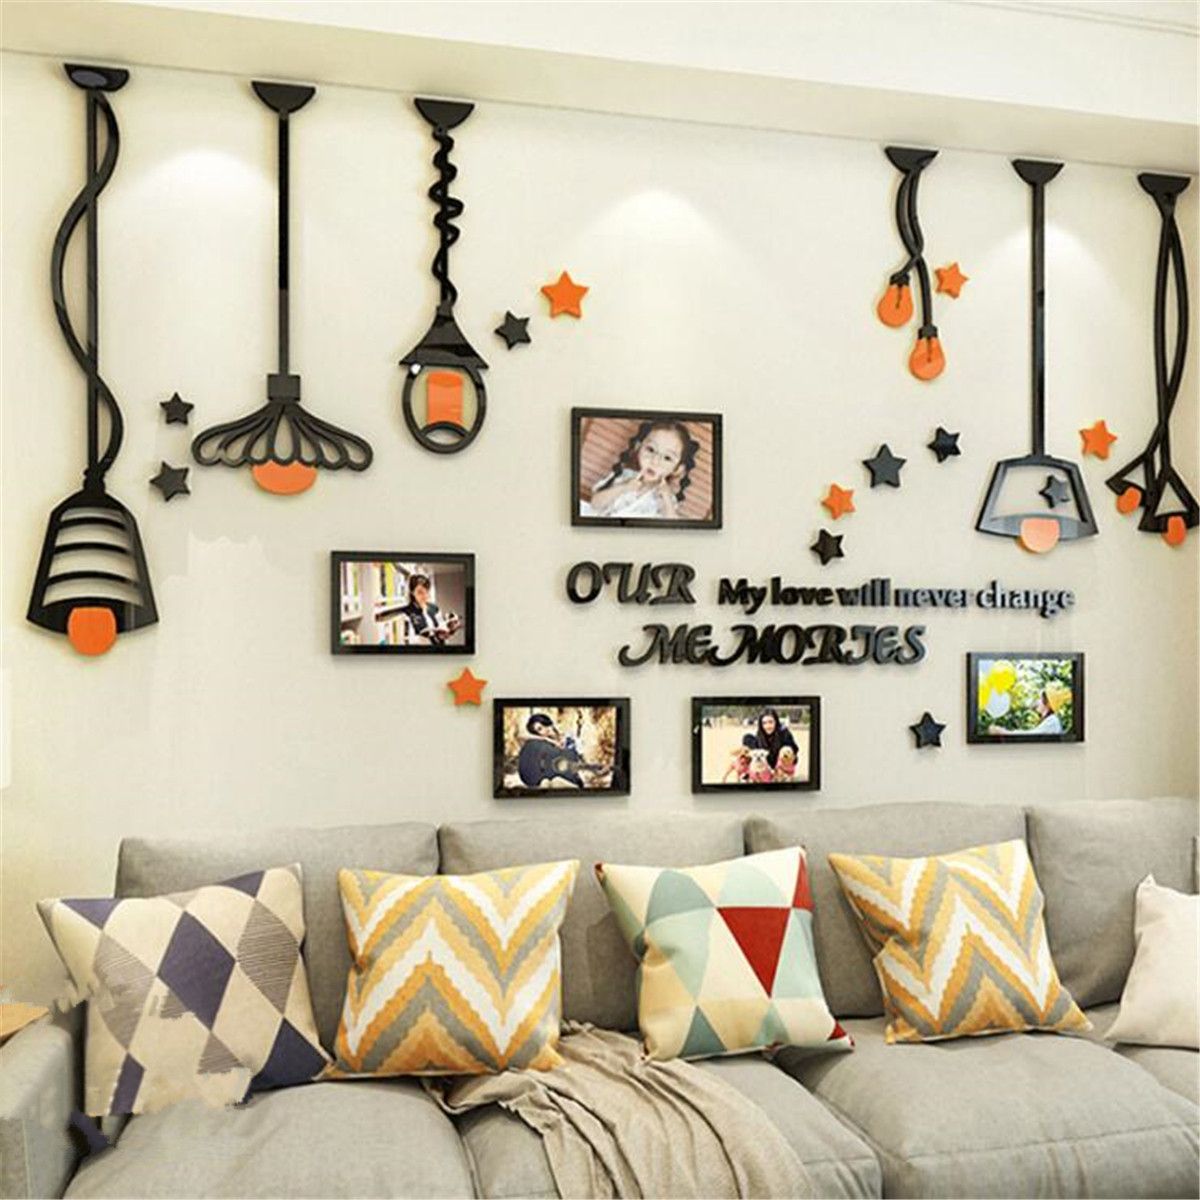 3D-Acrylic-DIY-Photo-Frame-Wall-Sticker-Decal-Art-Office-Bedroom-Home-Decorative-1478548